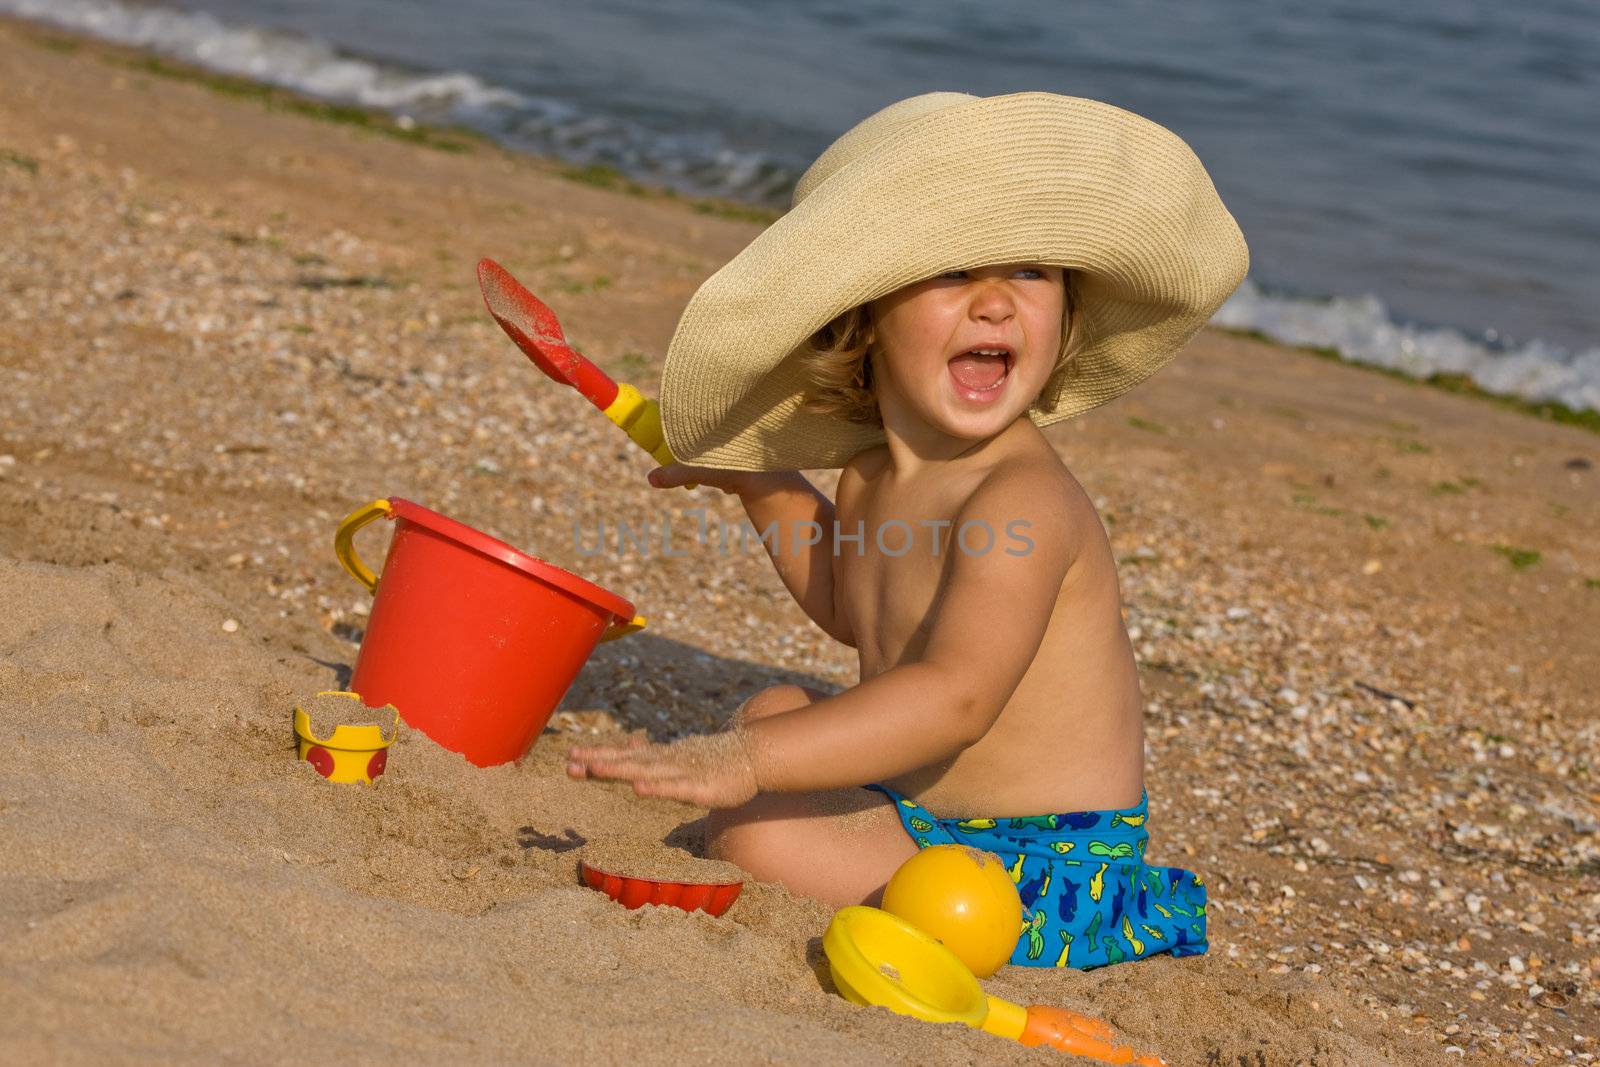 little girl in the bonnet plaing with sand